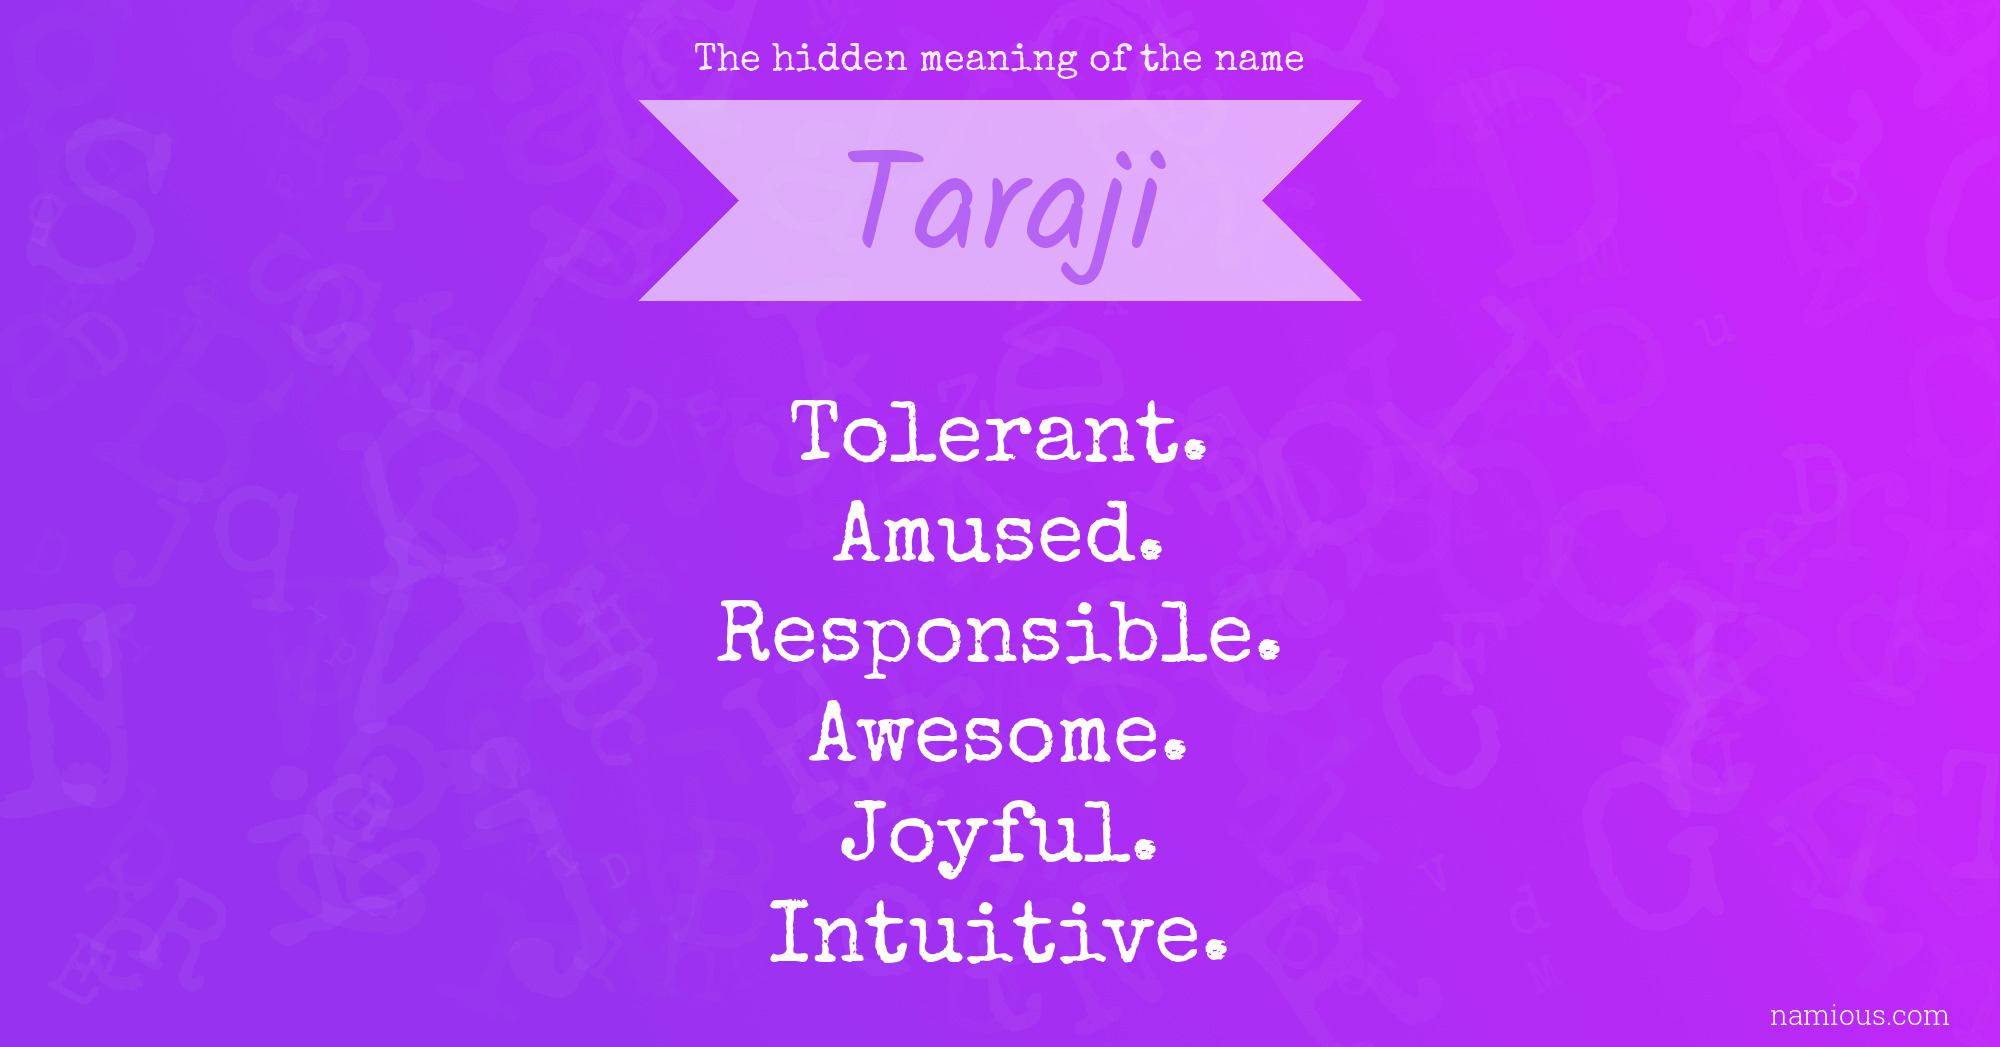 The hidden meaning of the name Taraji